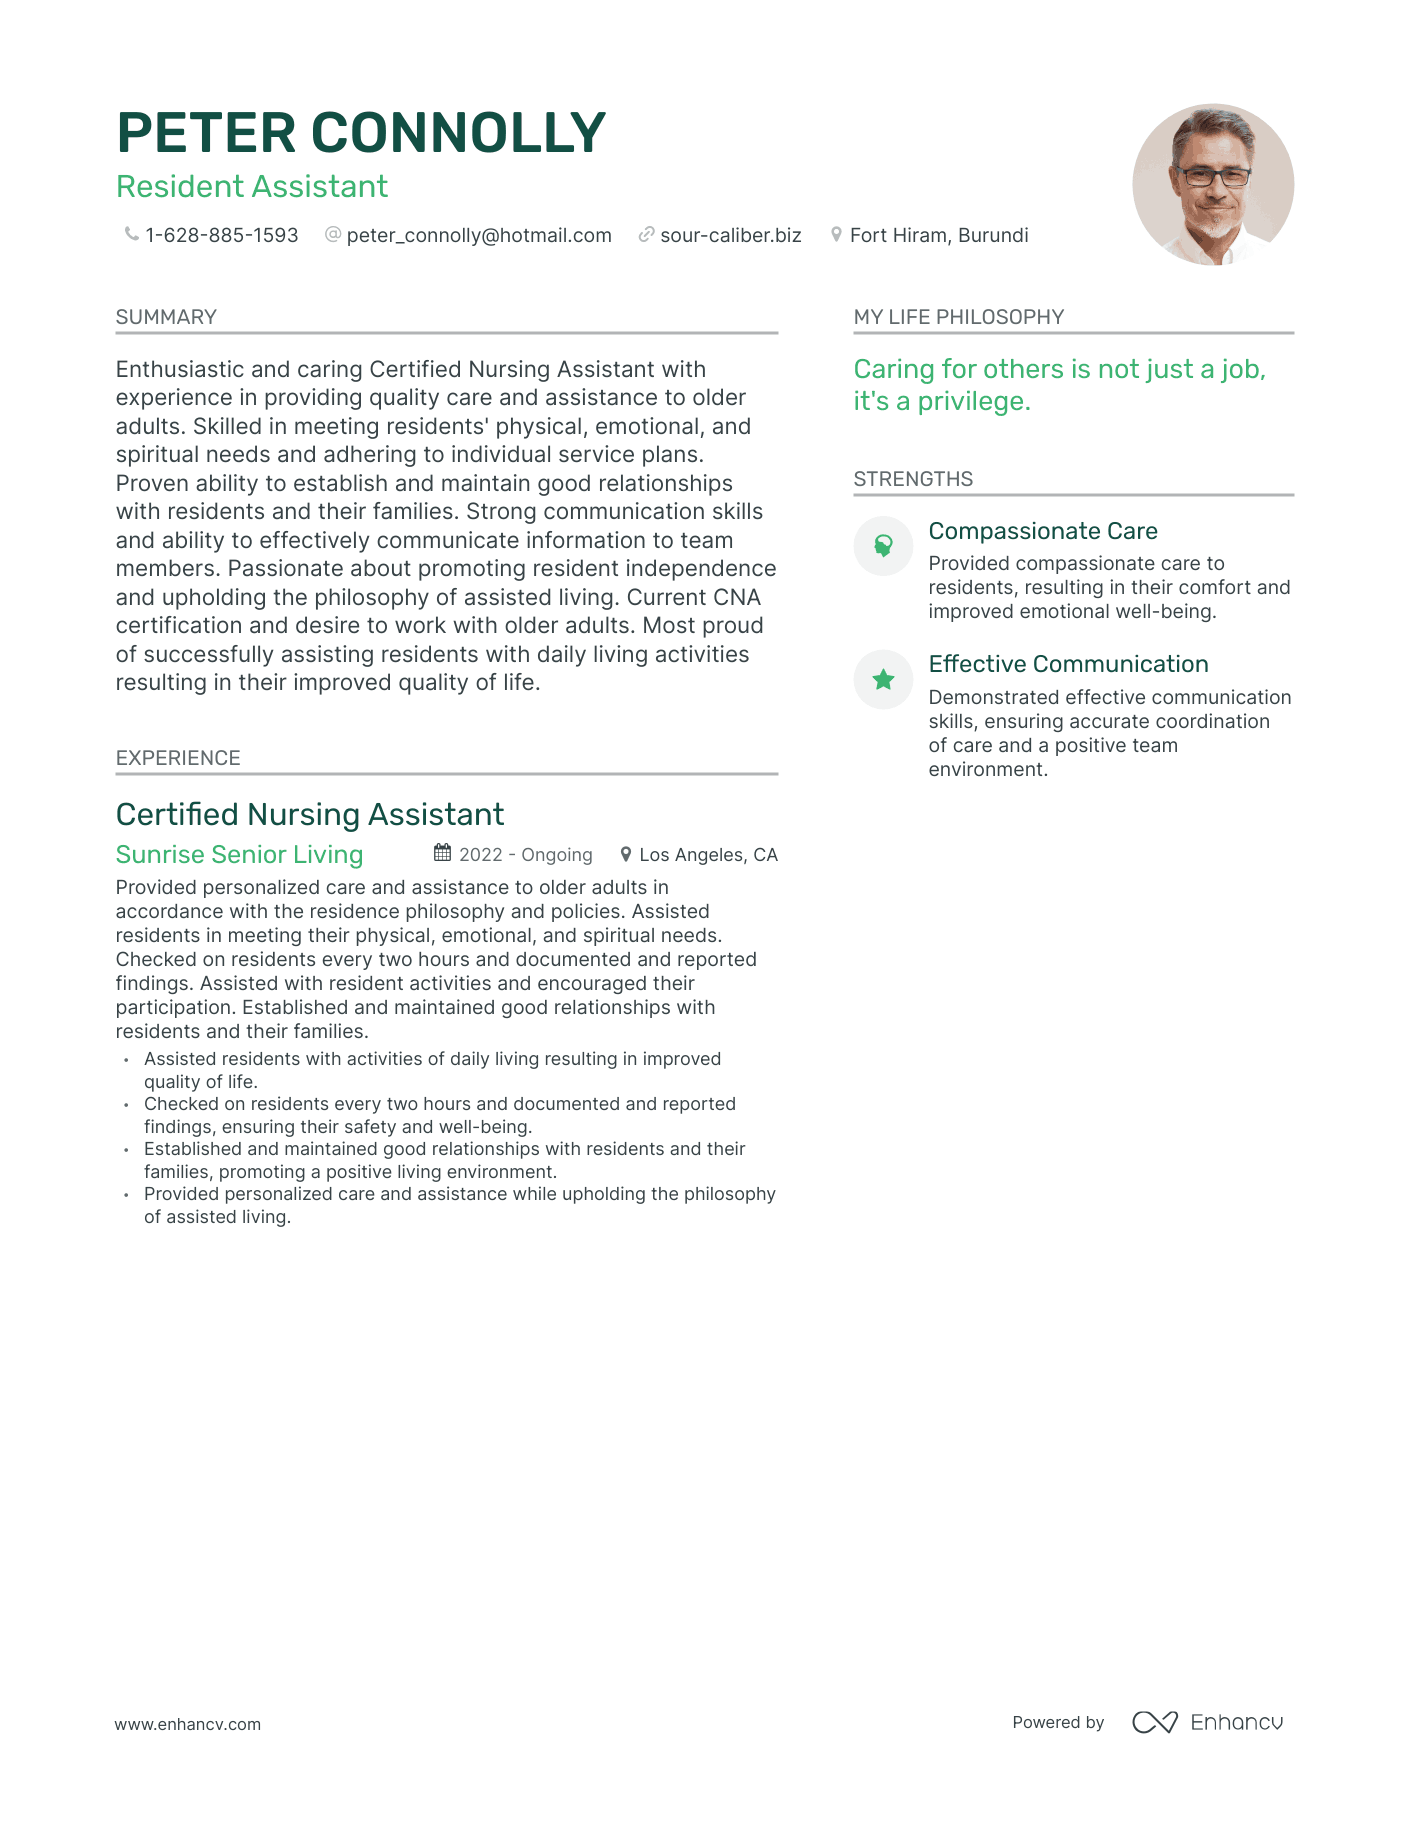 Resident Assistant resume example